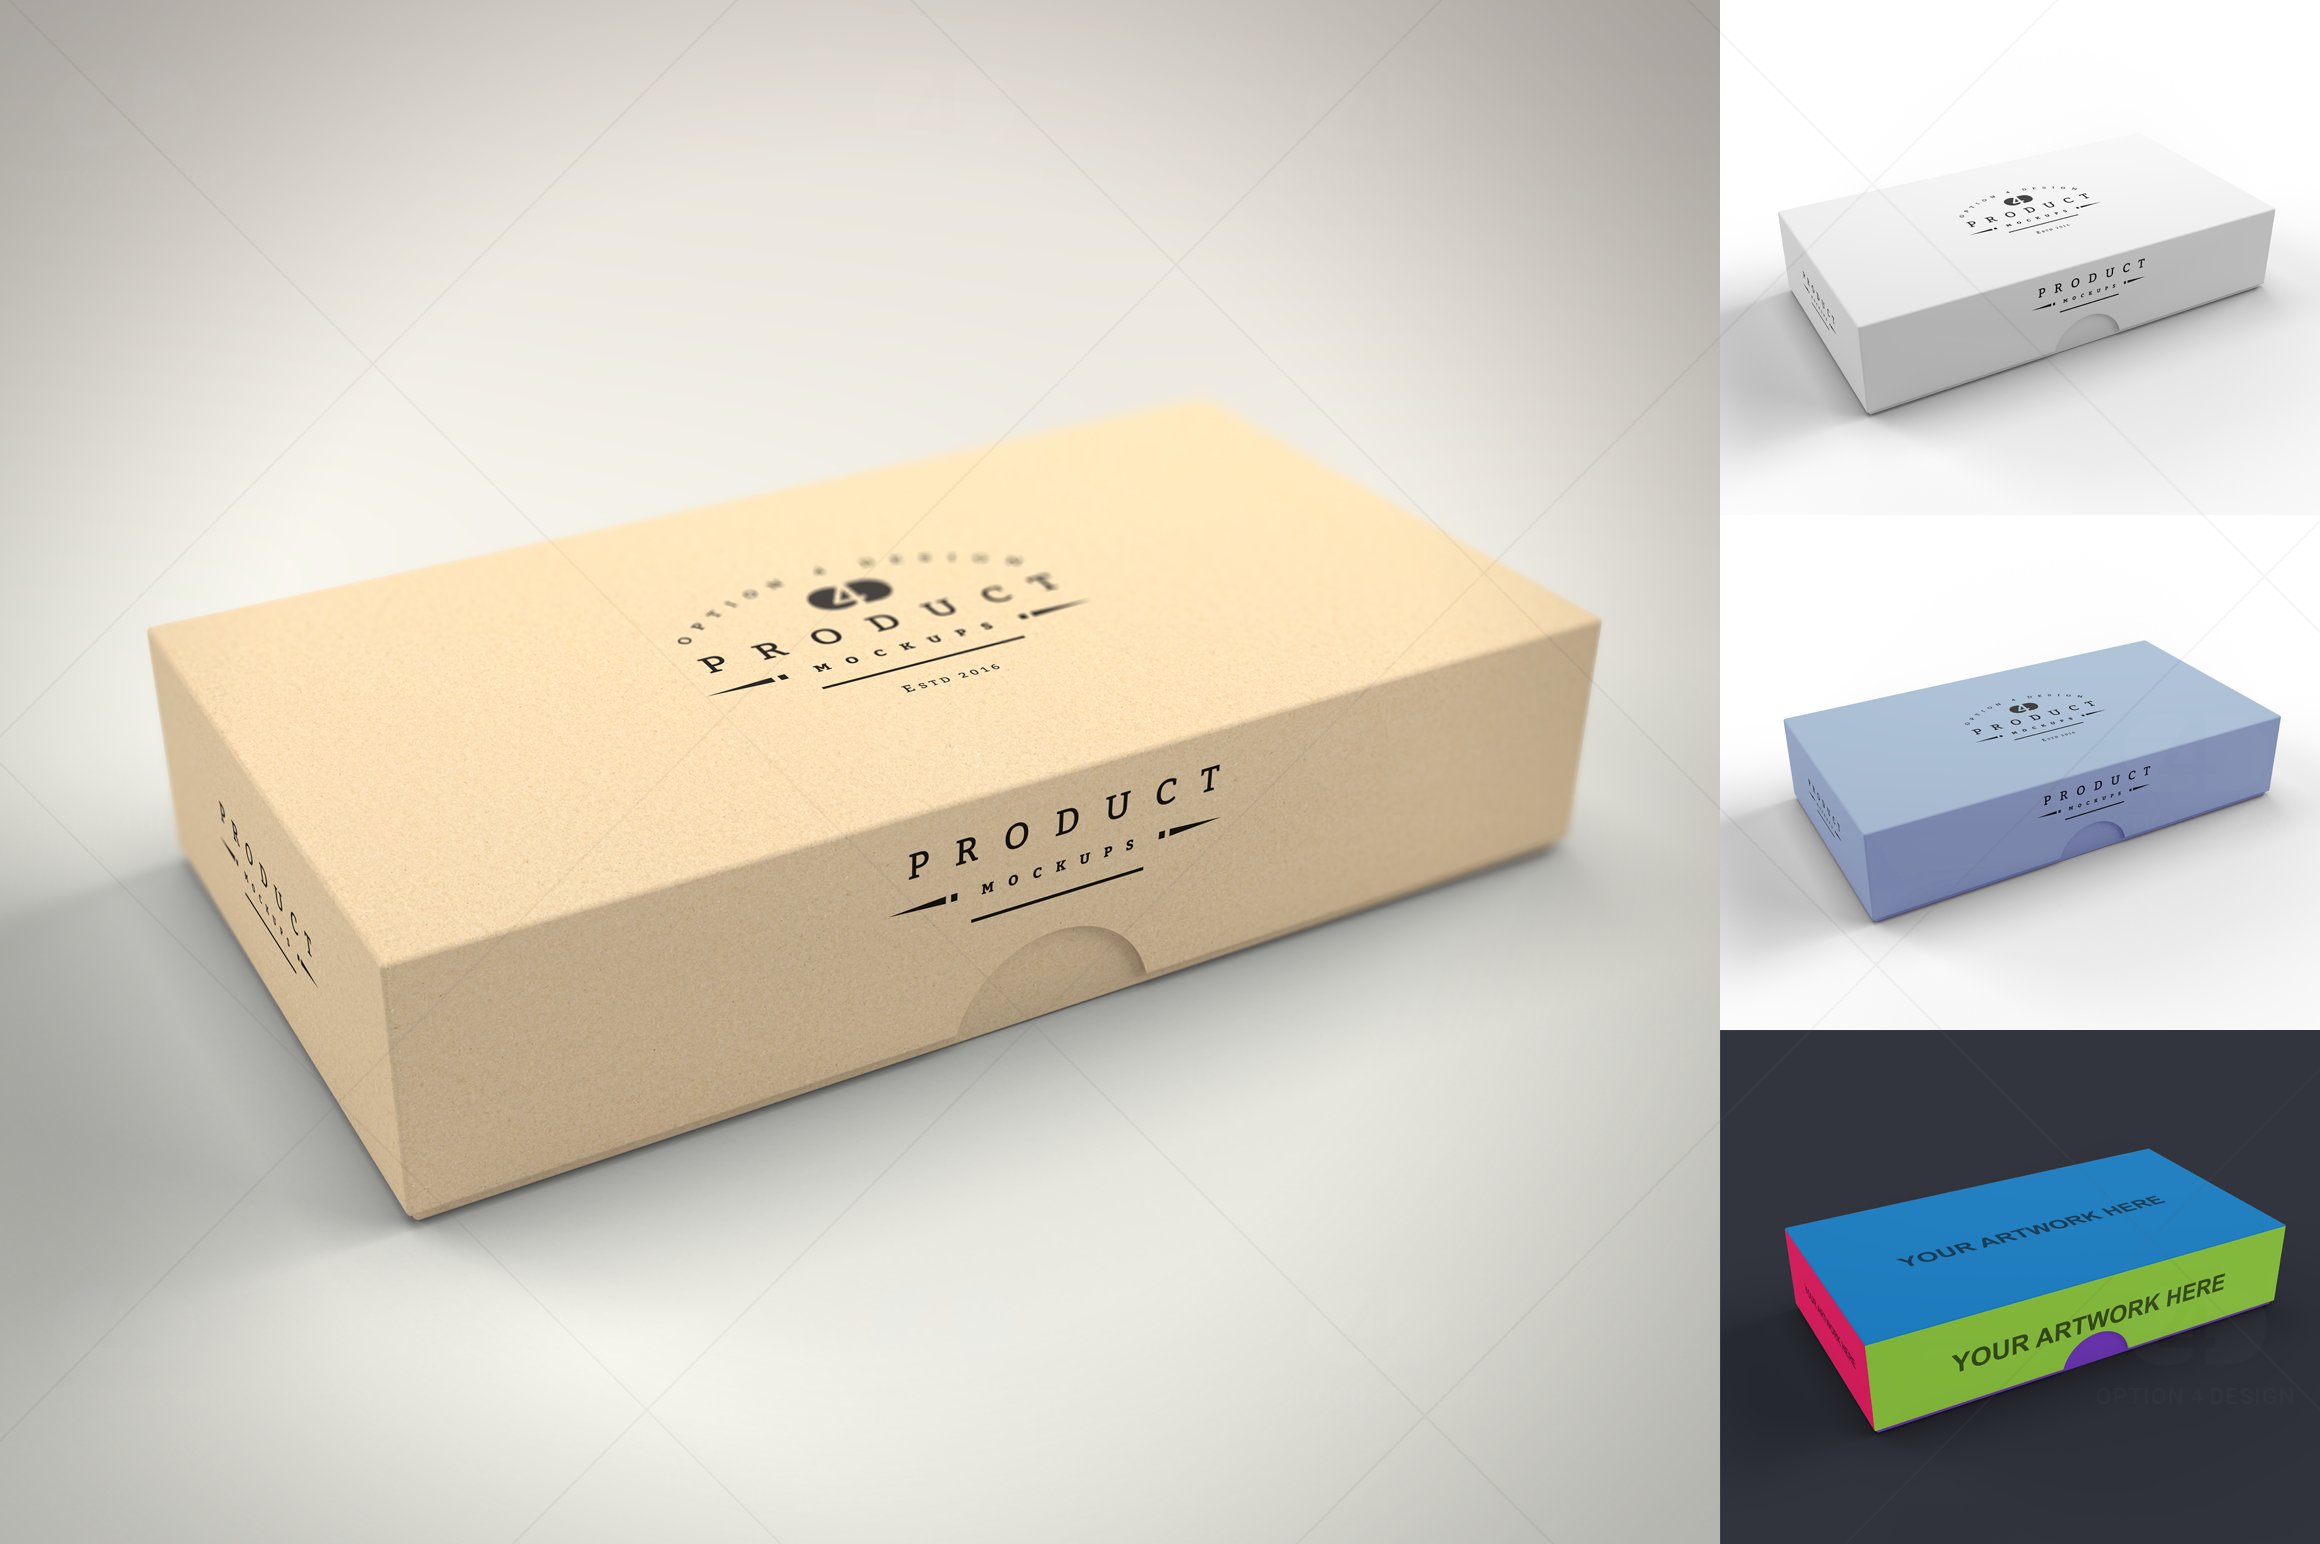 Product Box Mockup #01 preview image.